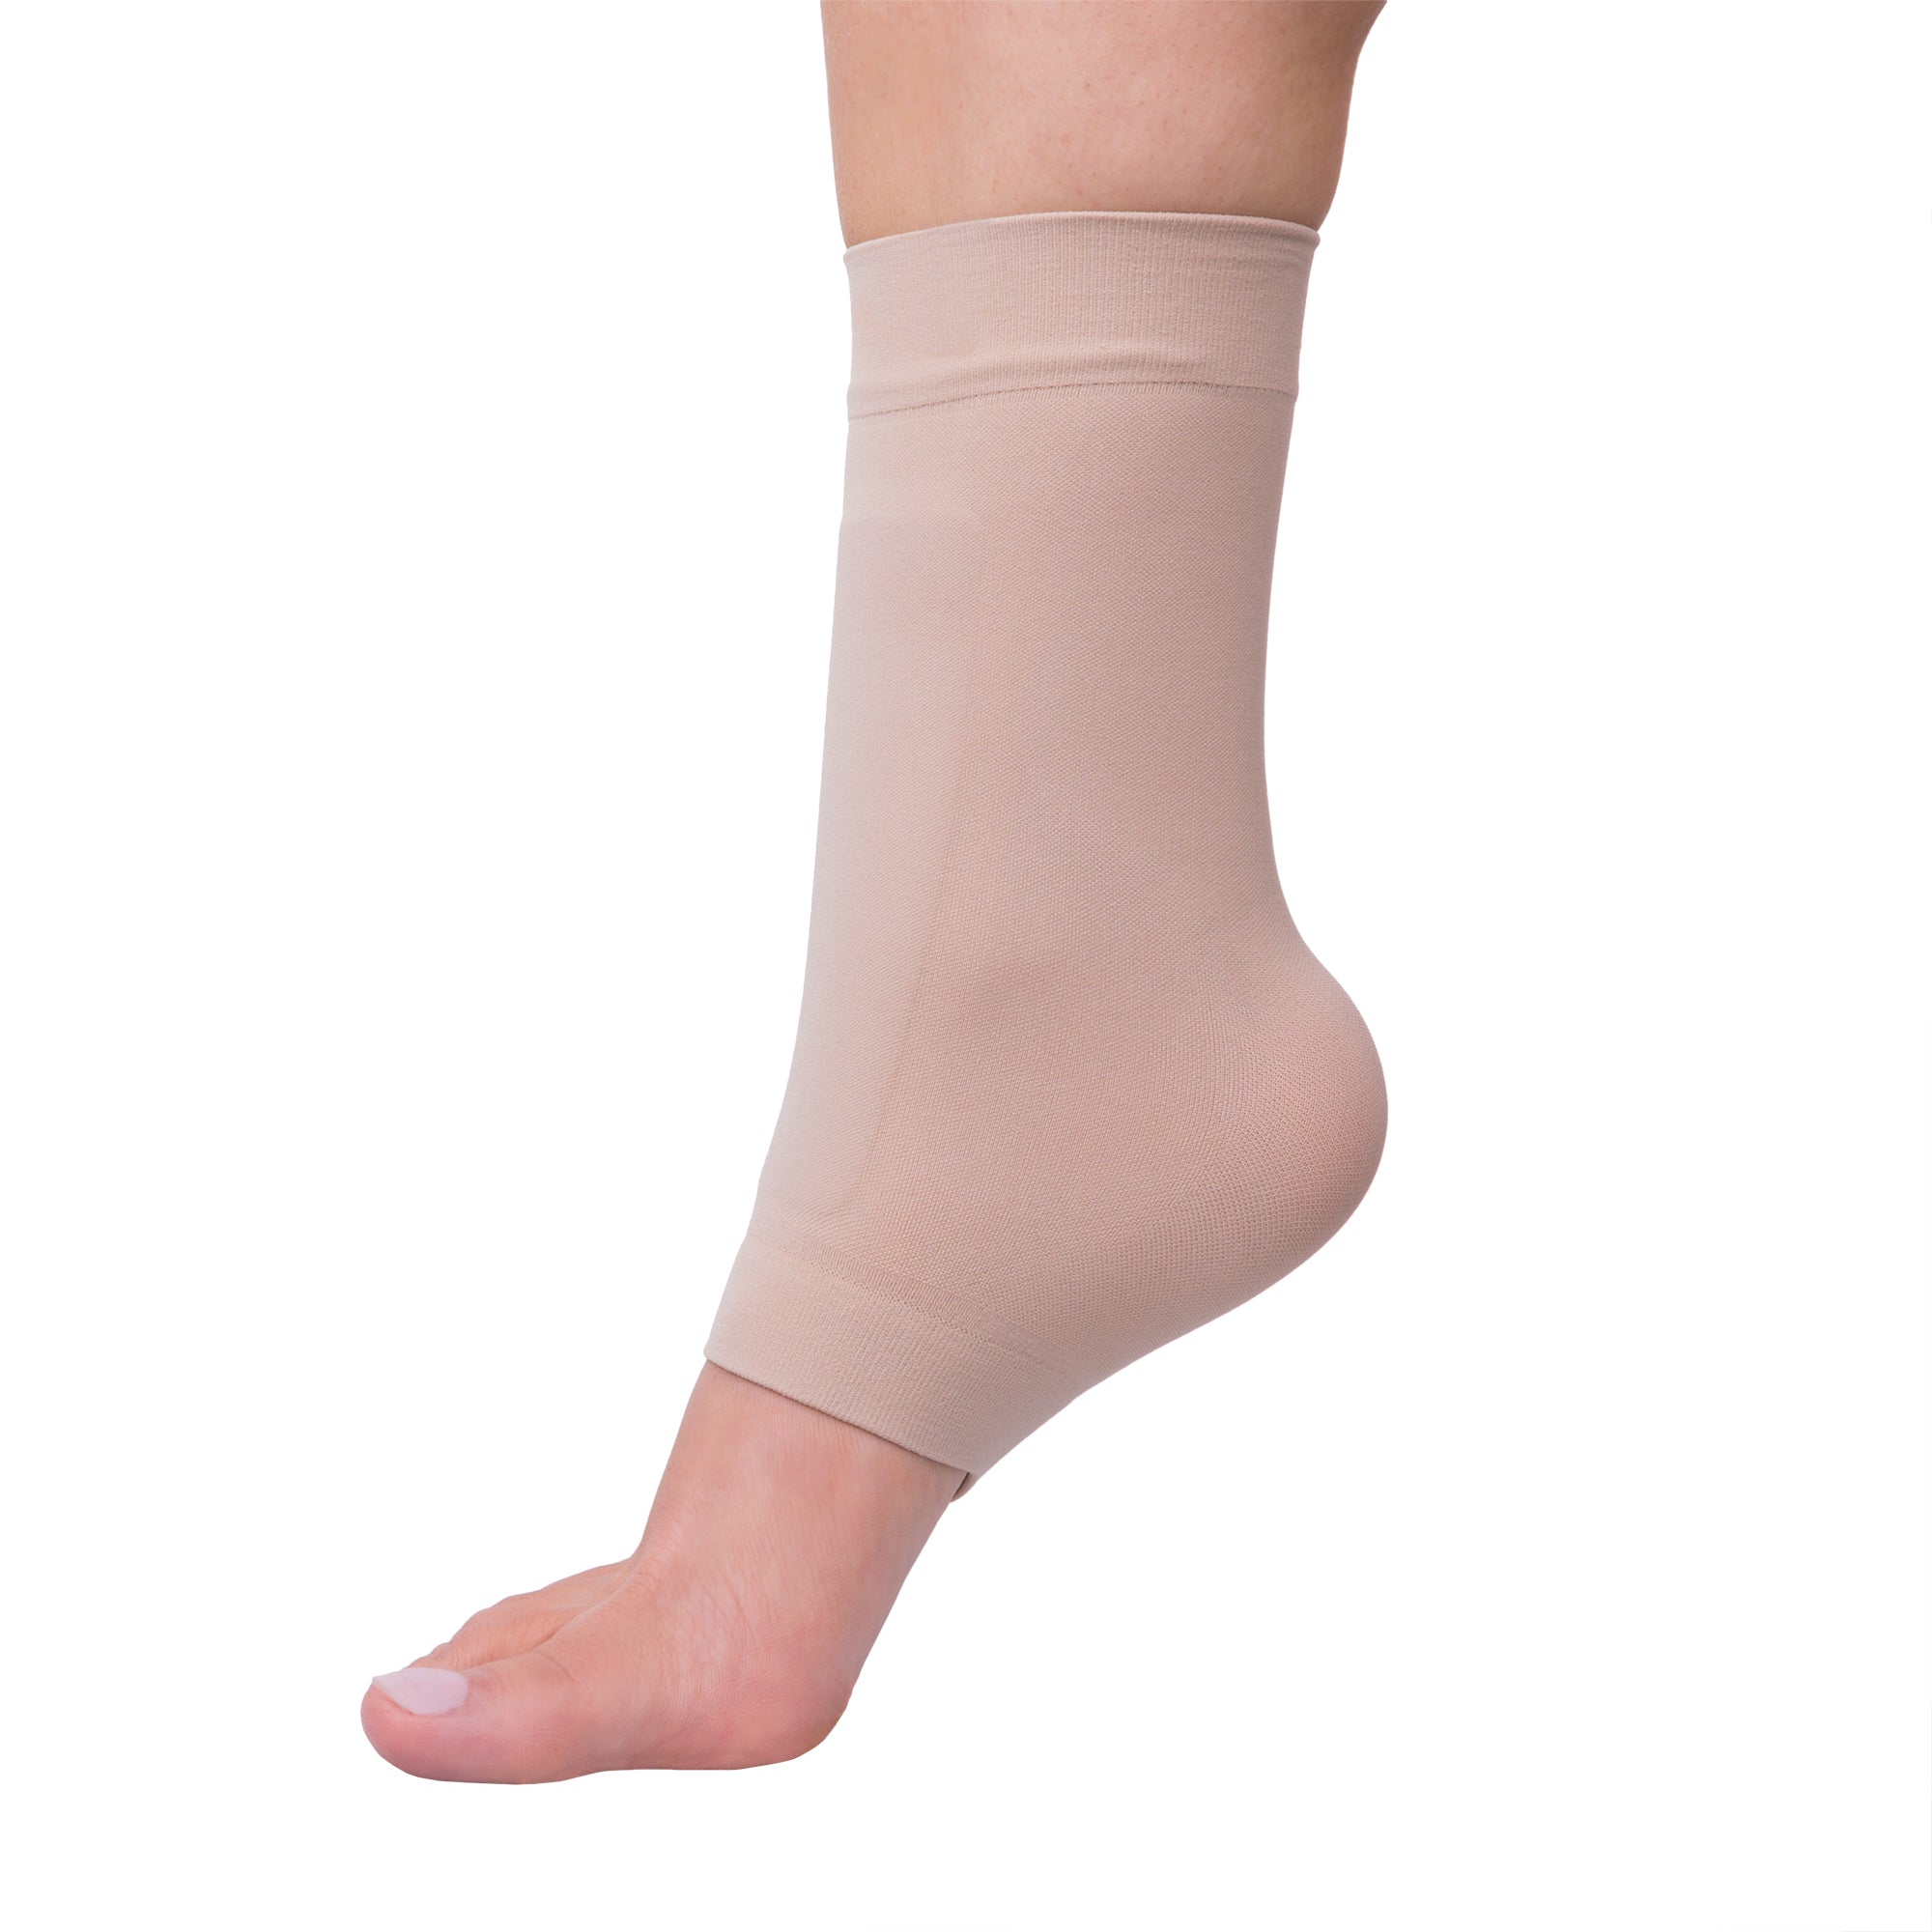 Padded Skate Socks for Lace Bite Protection - 1 Pair - ZenToes